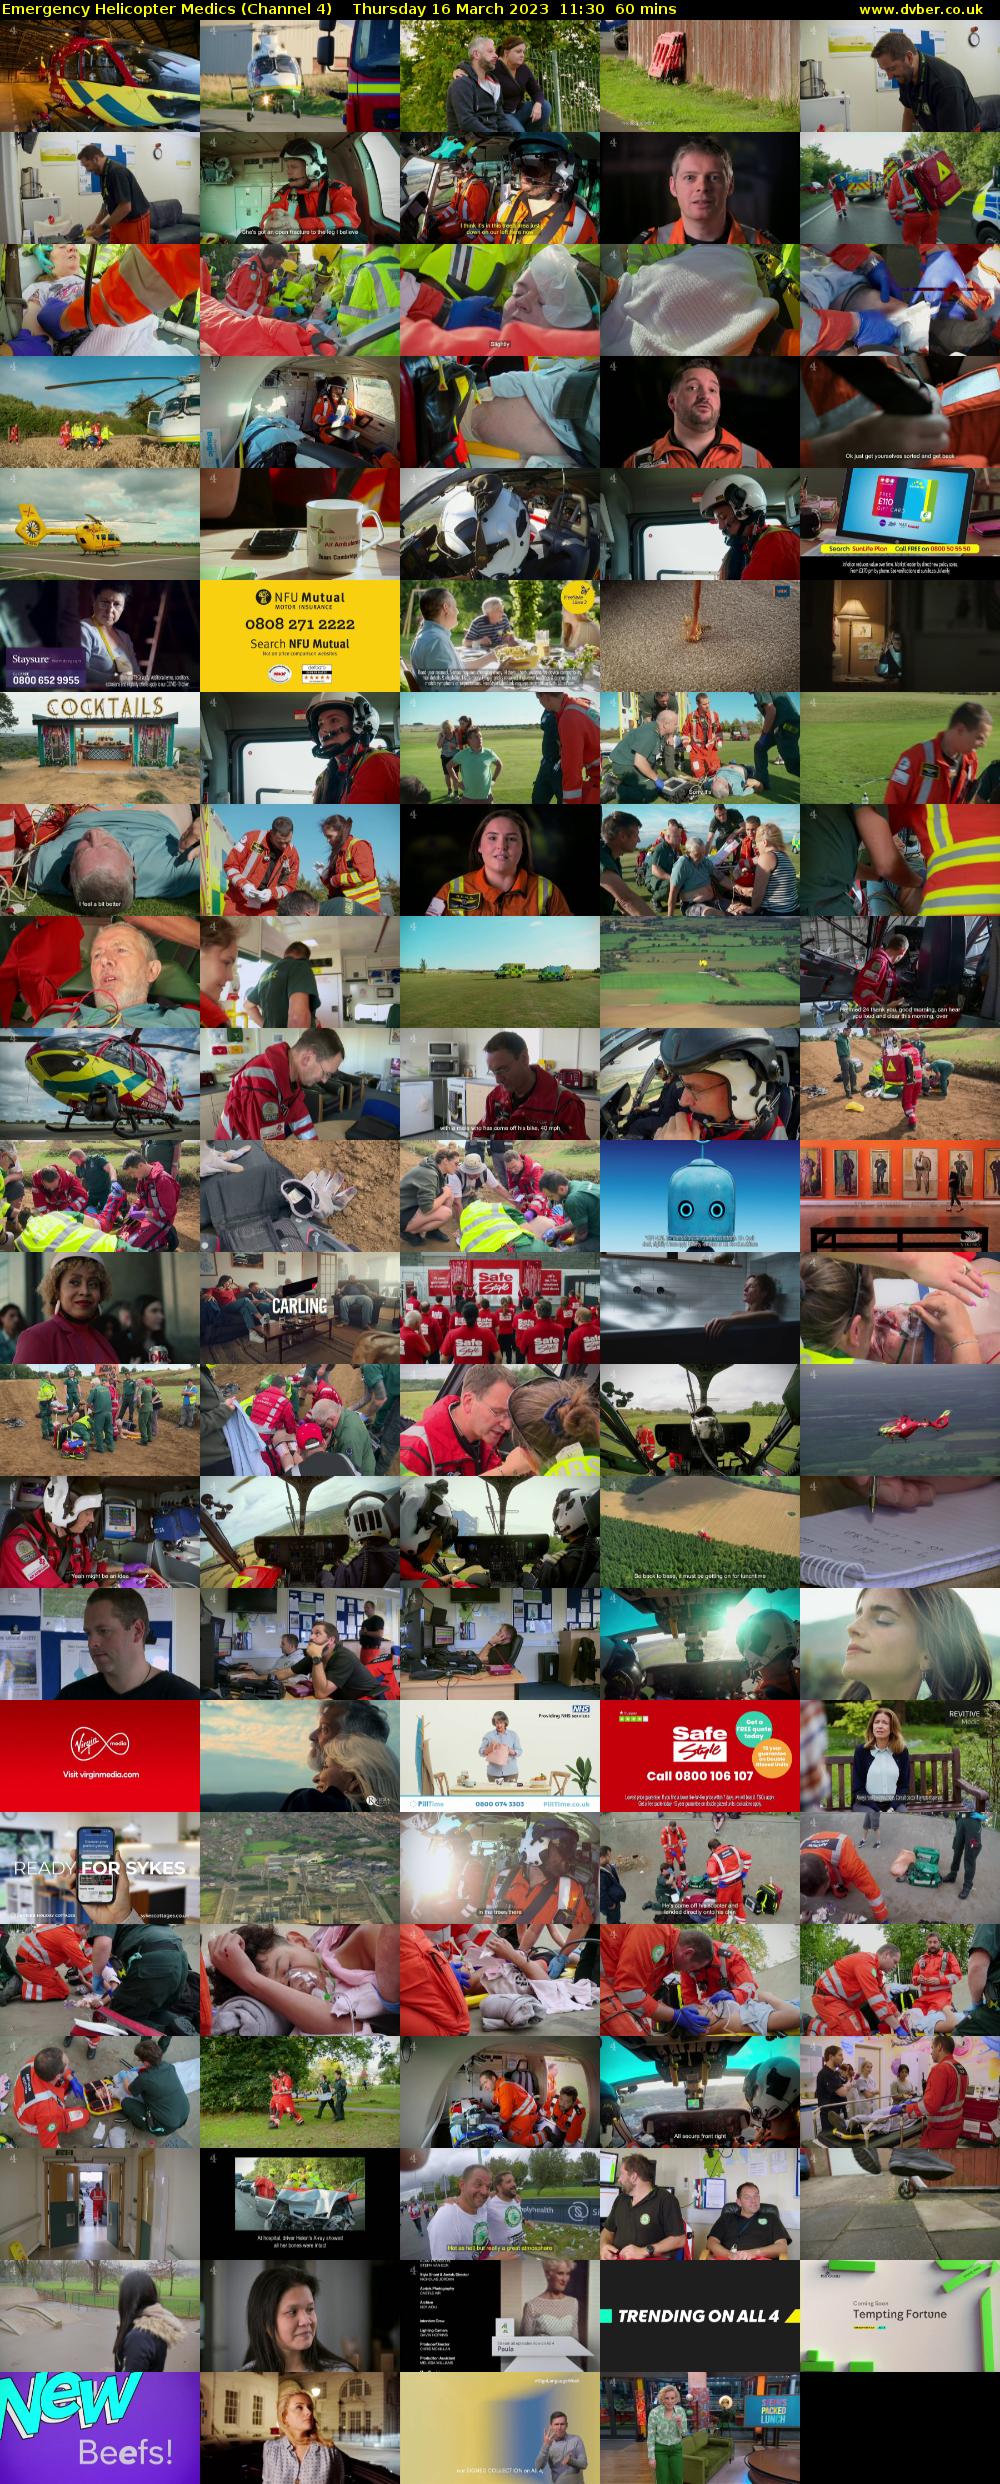 Emergency Helicopter Medics (Channel 4) Thursday 16 March 2023 11:30 - 12:30